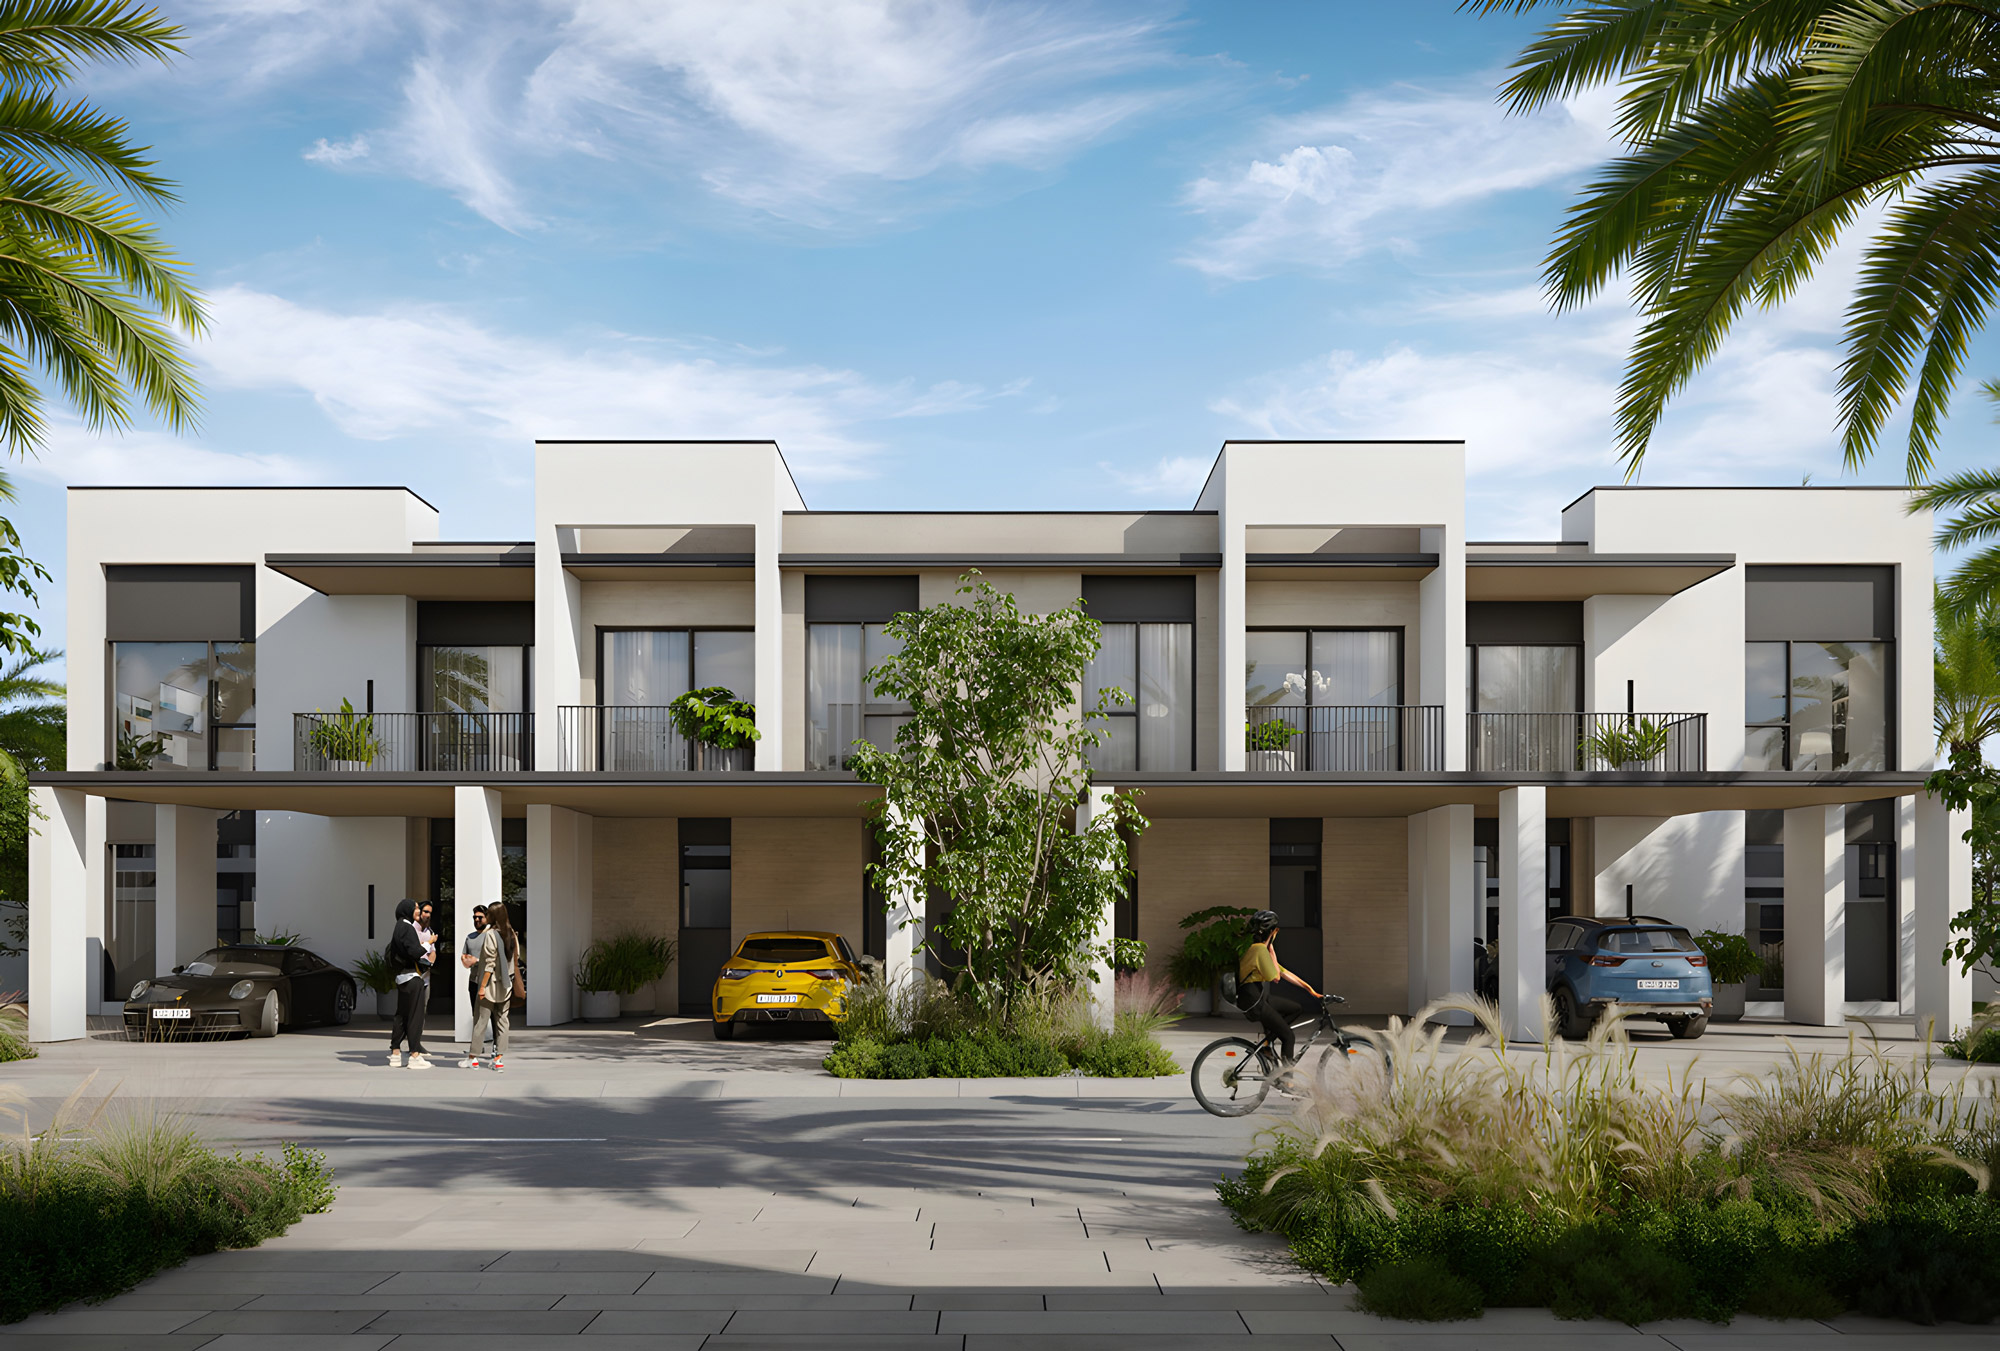 uploads/sale_property/3-br-townhouses-for-sale-in-may-at-arabian-ranches-iii/b150c29eb1d375f10e2e9475074696c0.webp